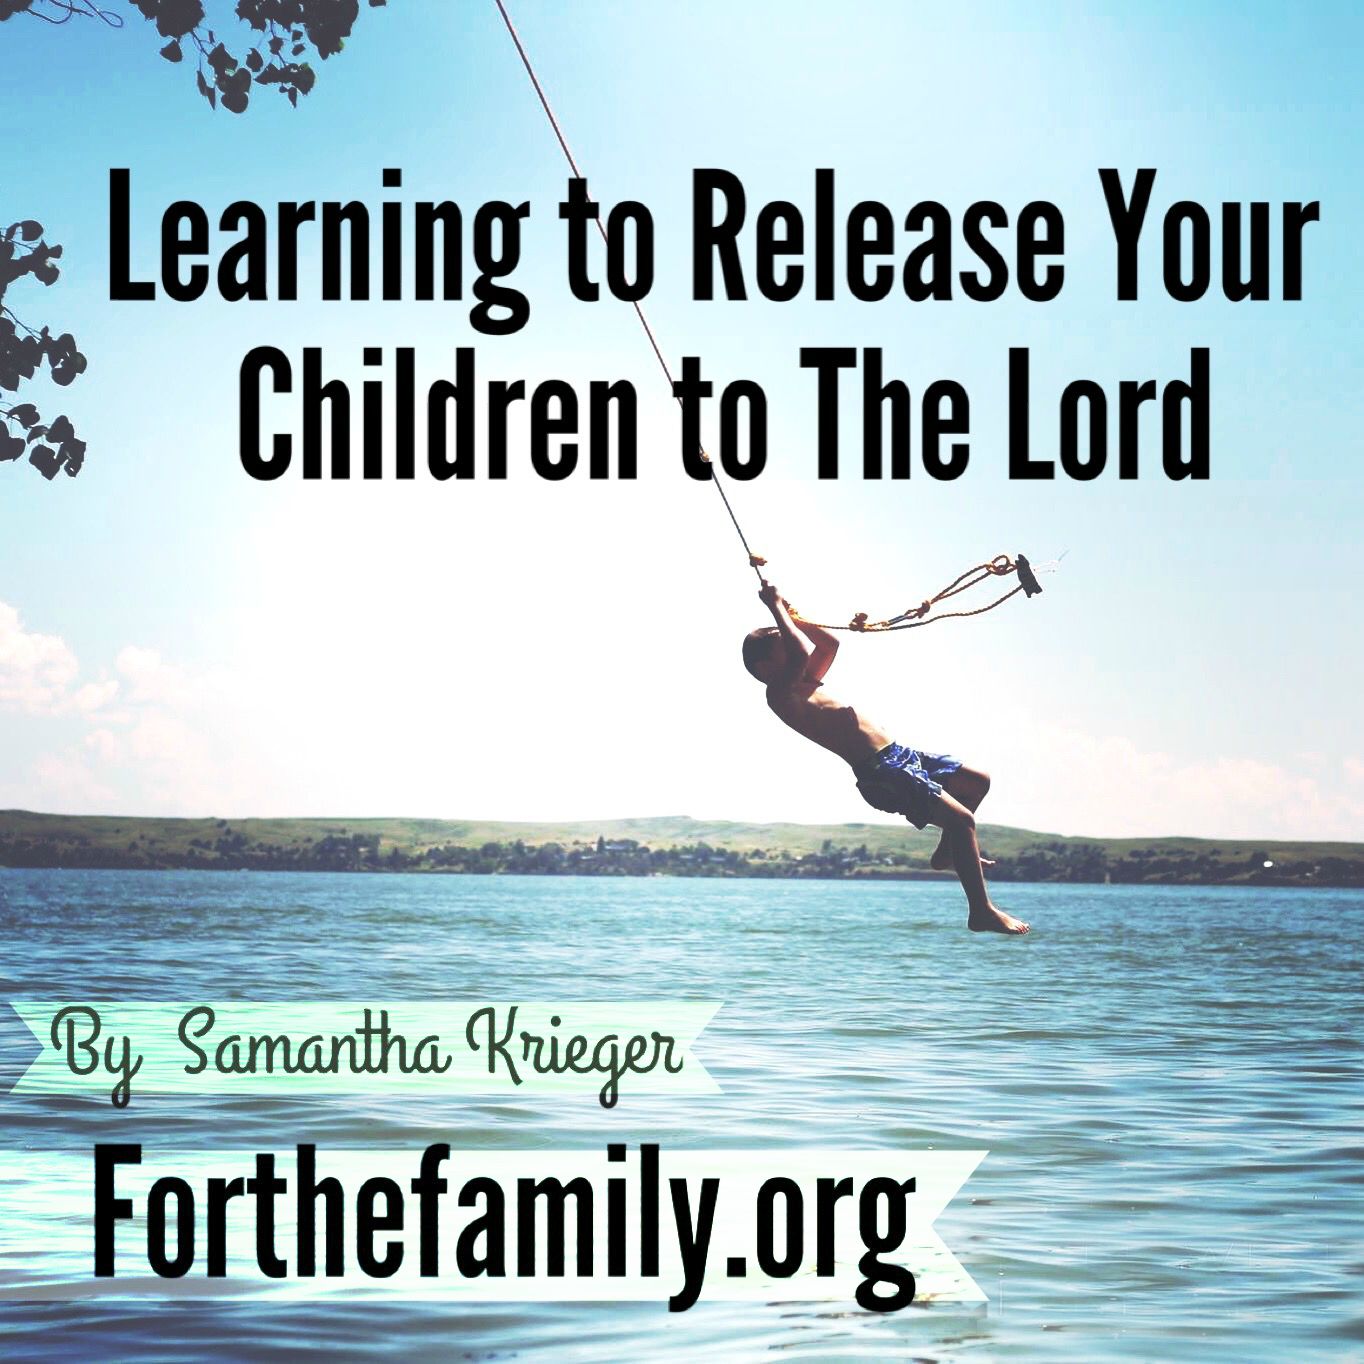 Learning to Release Your Children to The Lord